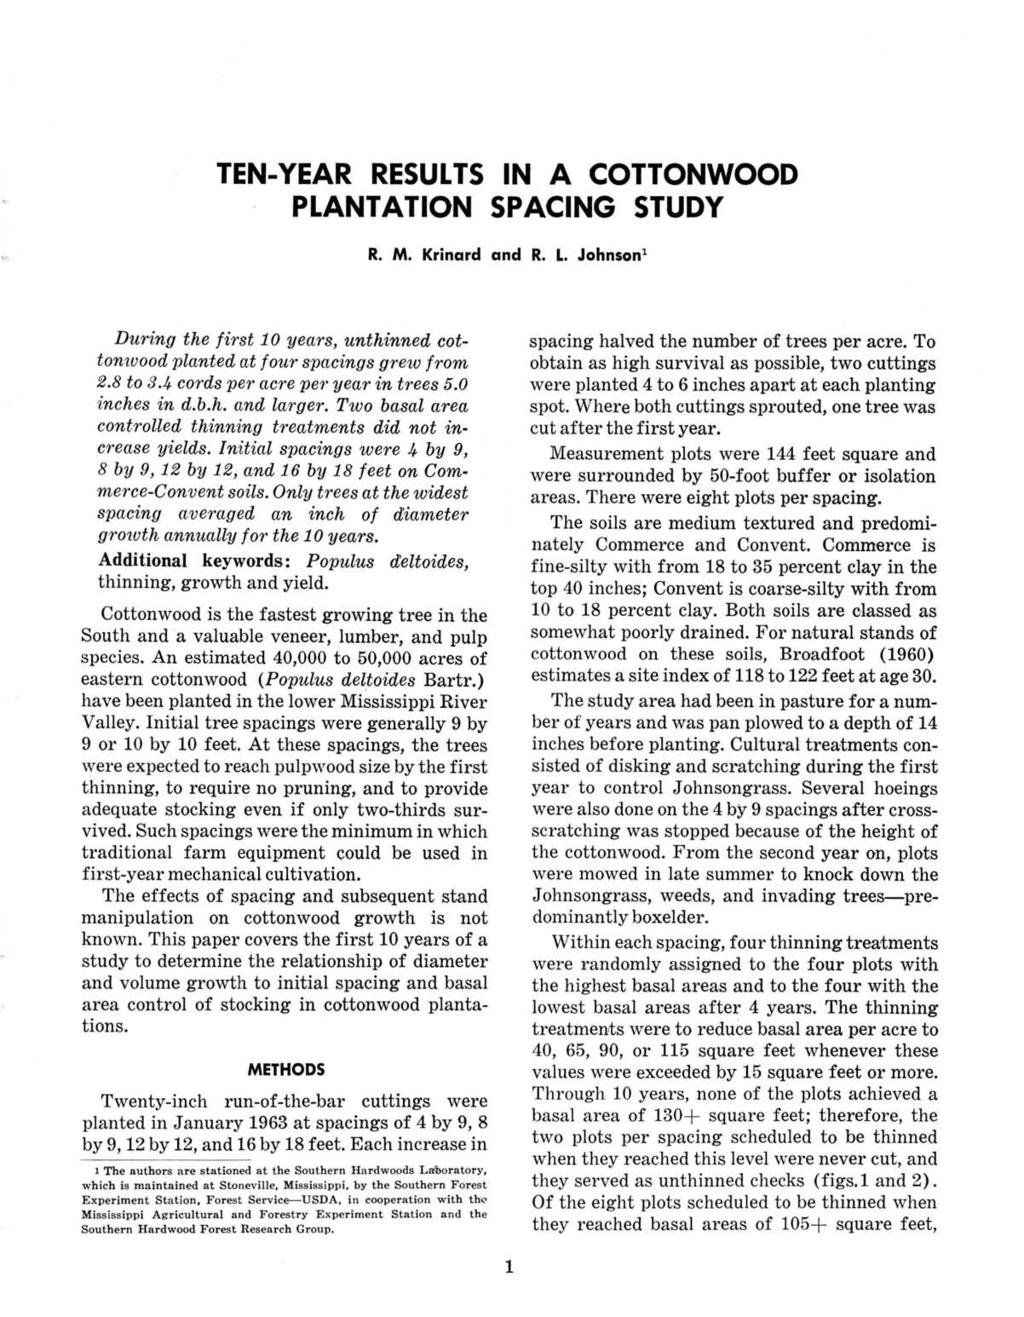 TEN-YEAR RESULTS N A COTTONWOOD PLANTATON SPACNG STUDY R. M. Krinard and R. L. Johnson l During the first 10 years, unthinned cottonwood planted at four spacings grew from 2.8 to 3.